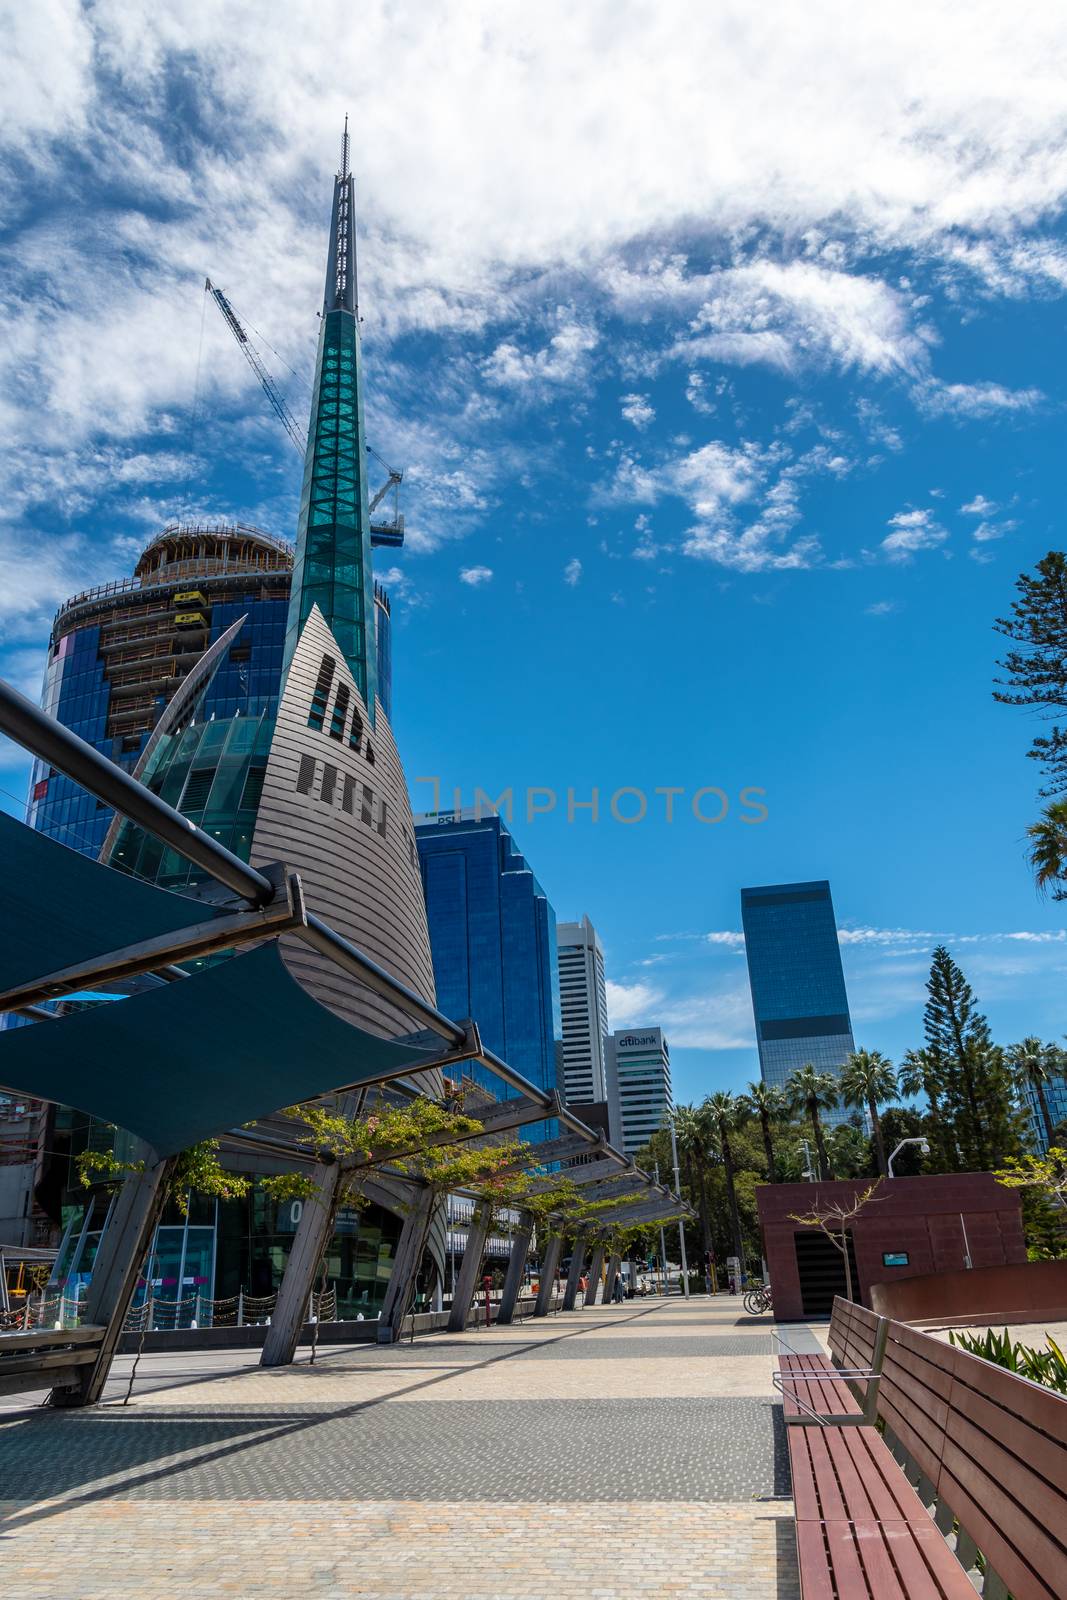 The Bell Tower at Elizabeth Quay in Perth in Western Australia